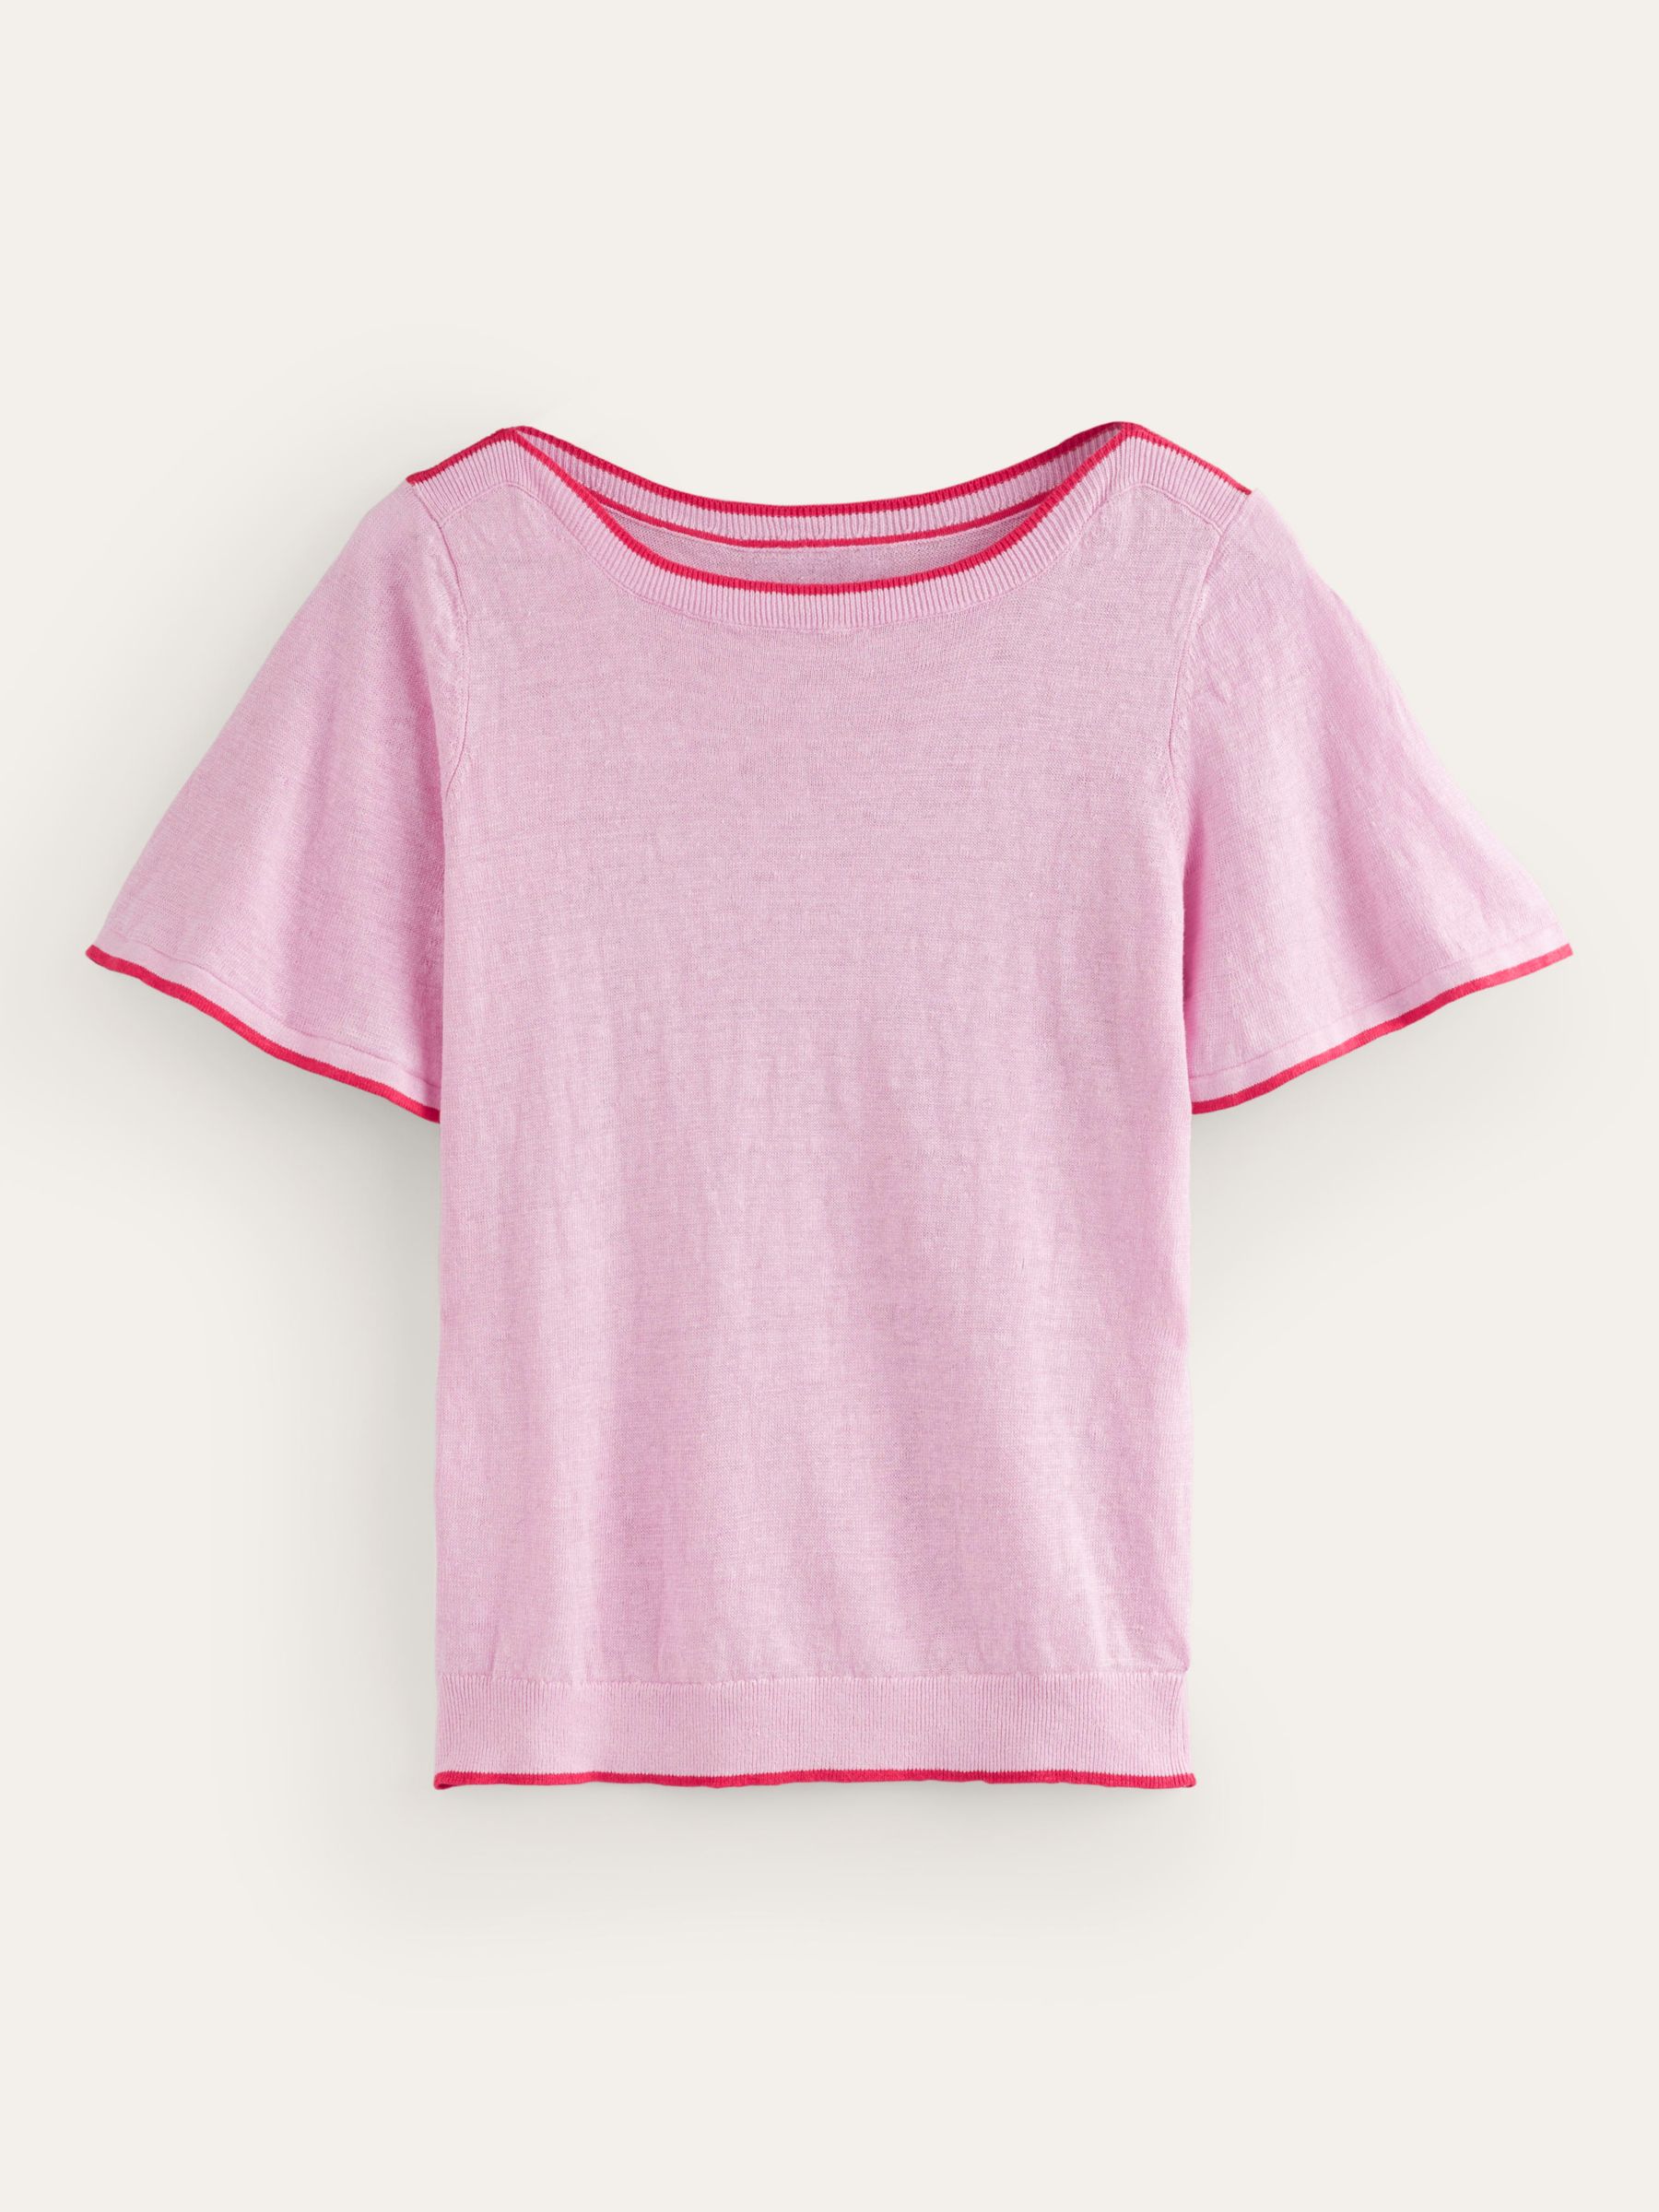 Boden Maggie Boat Neck Linen T-Shirt, Sweet Lilac Pink, XS